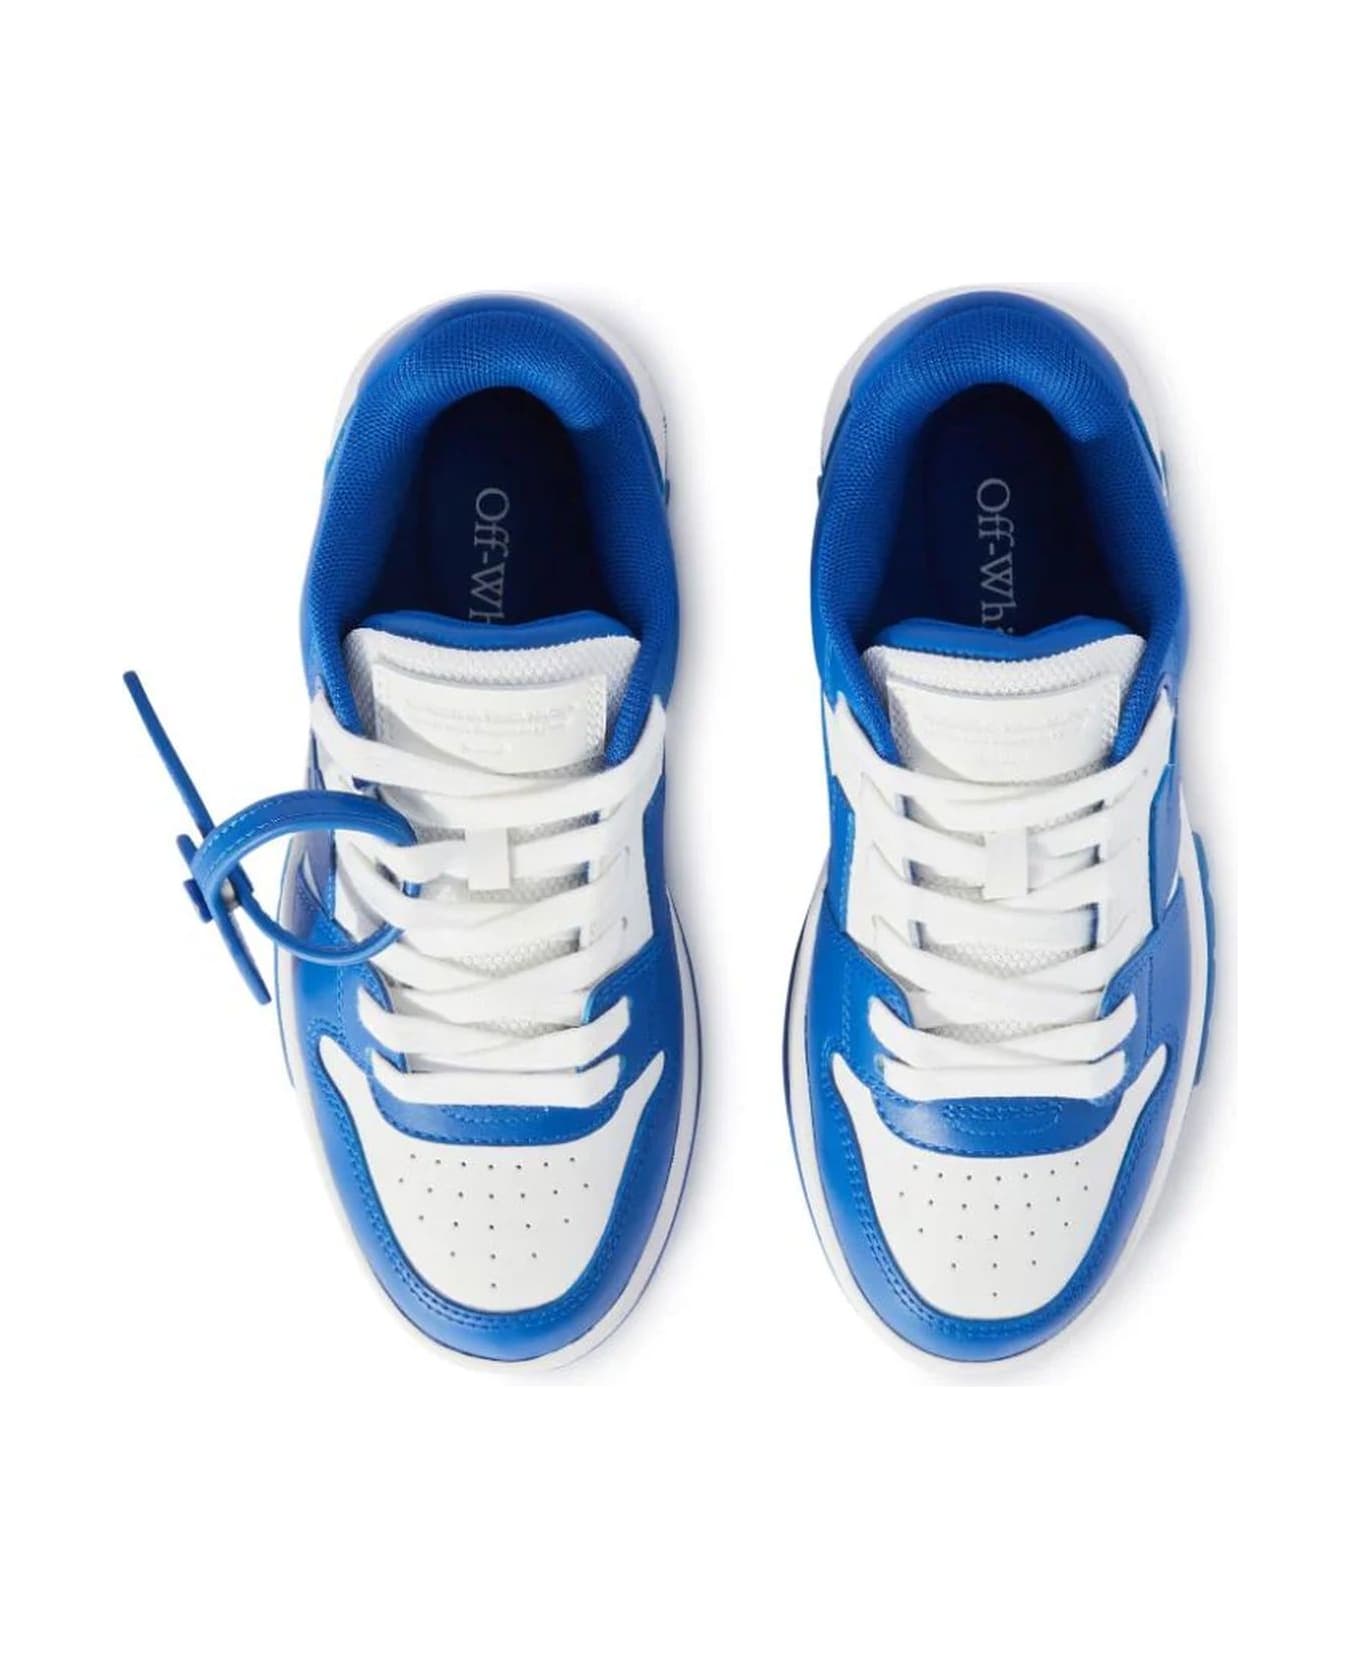 Off-White Off White Sneakers Blue - Blue シューズ